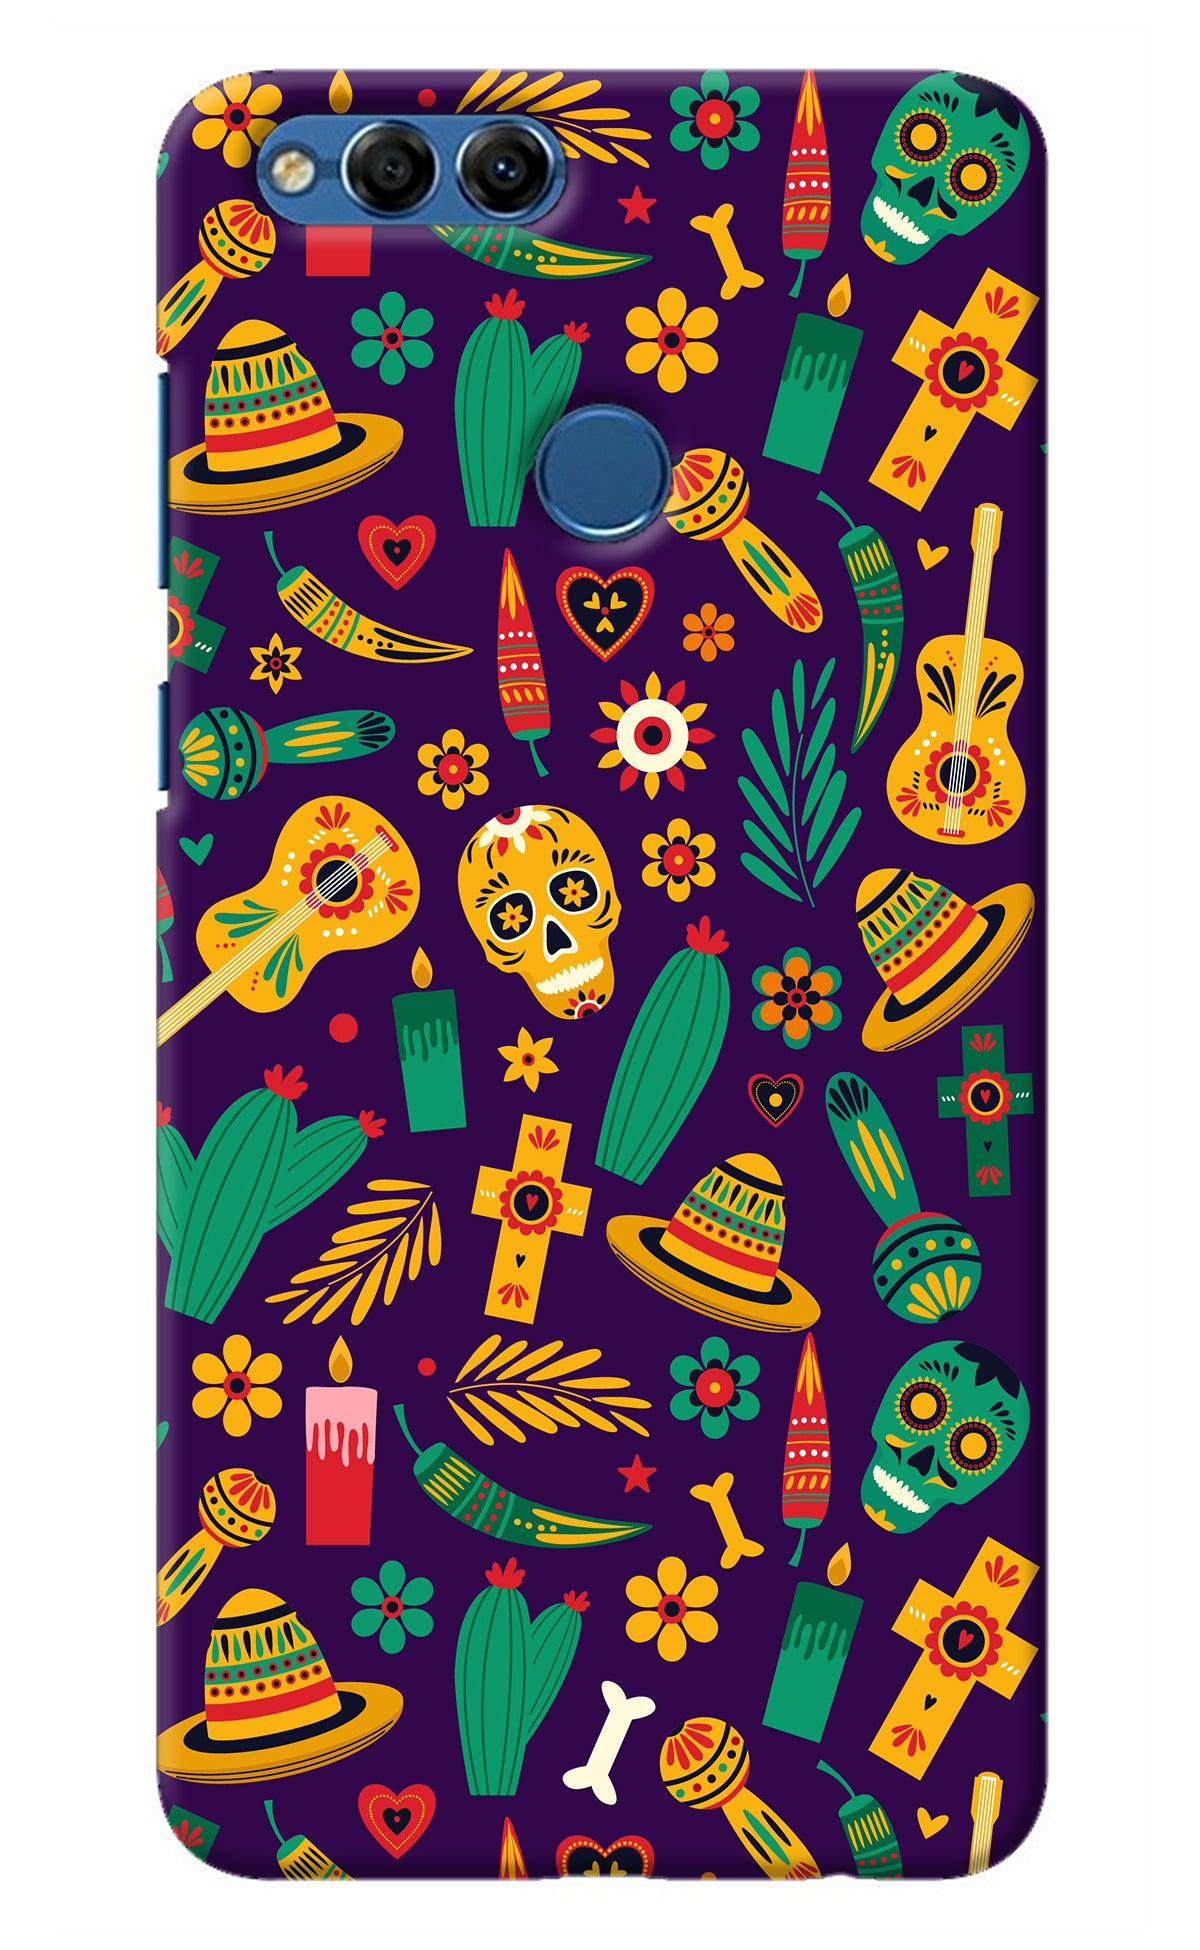 Mexican Artwork Honor 7X Back Cover